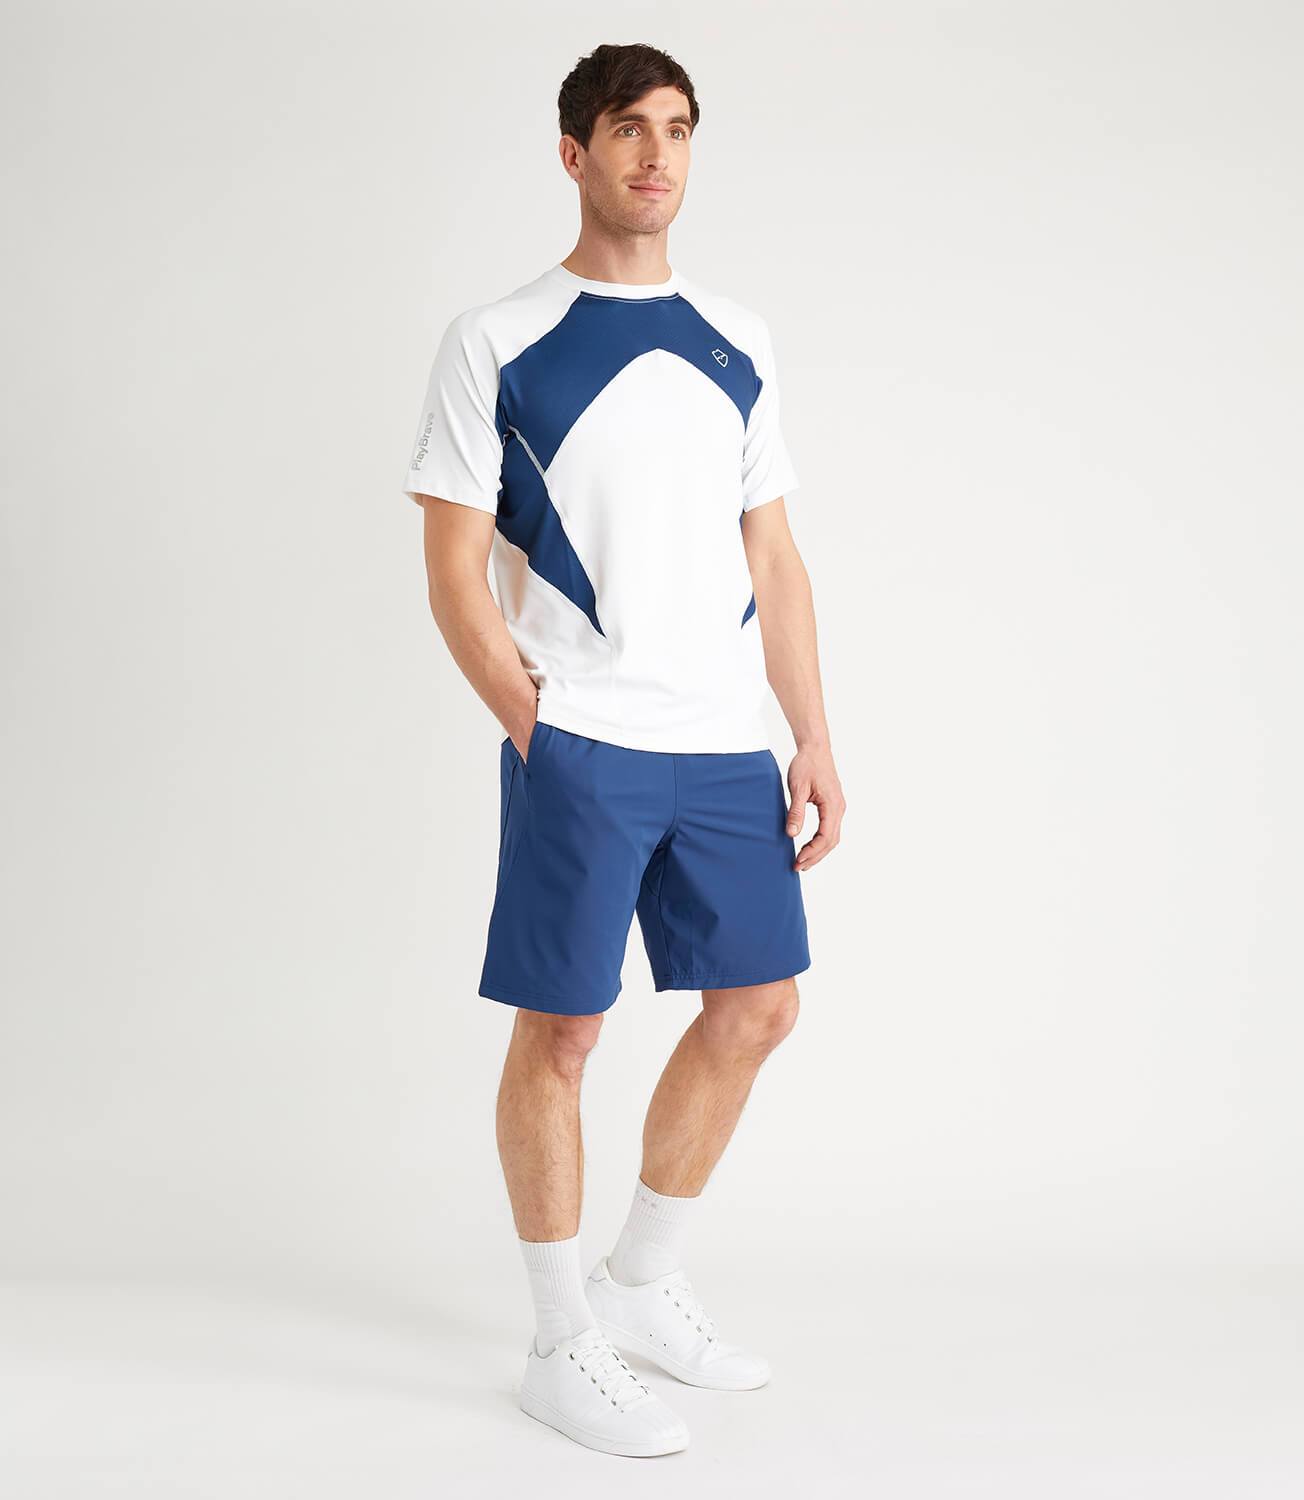 Terence Technical Tee White/Blue